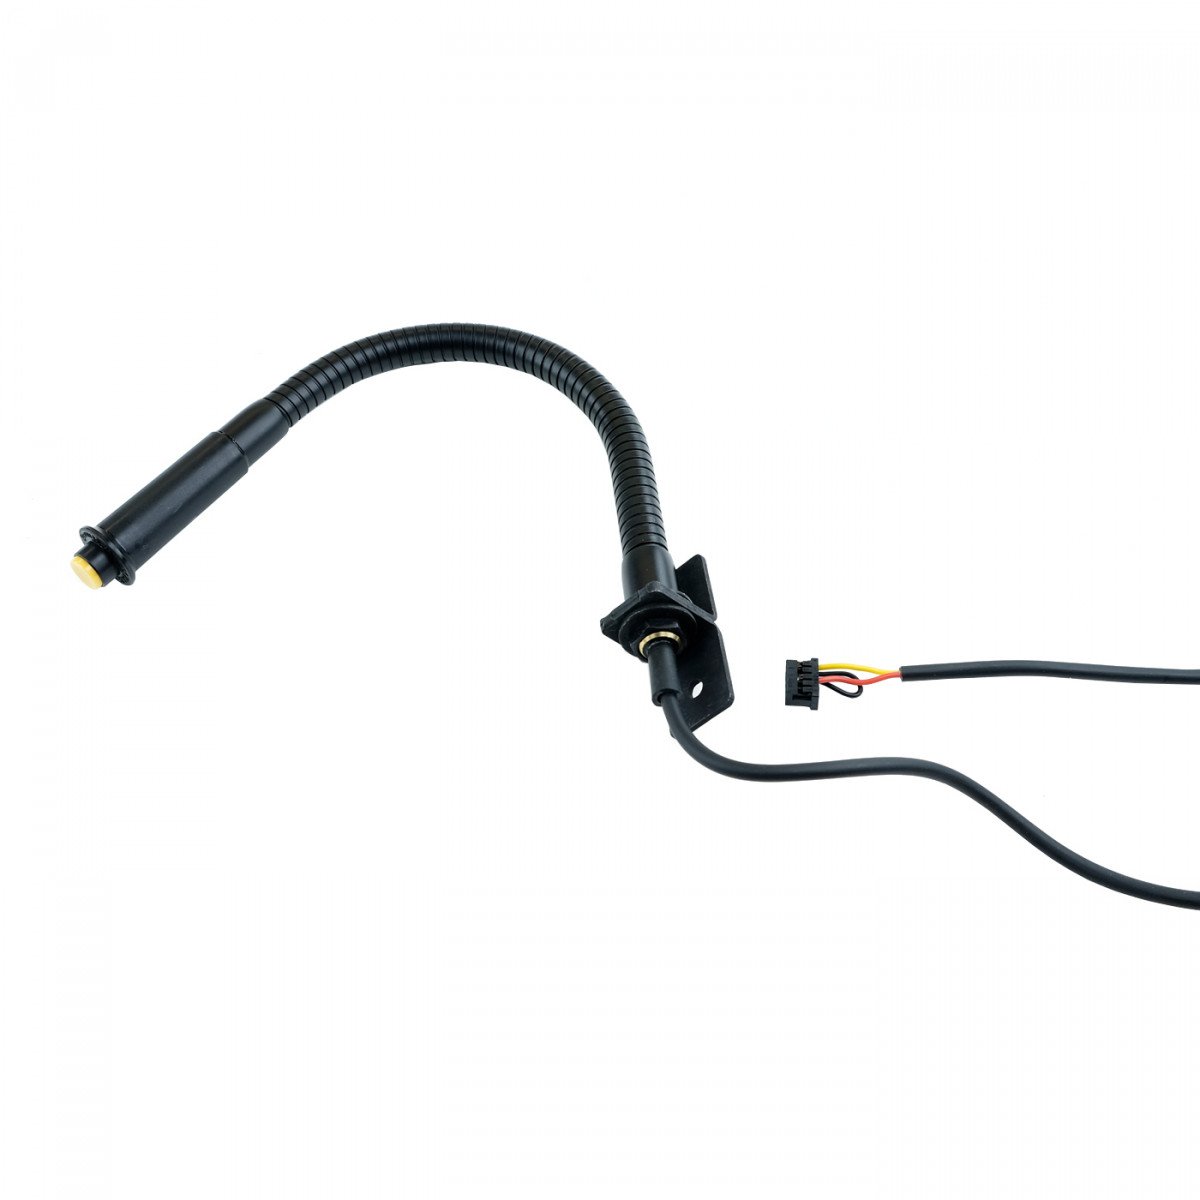 SEPURA PTT button with gooseneck, for connection to AIU or control unit, for SRG/SCG 300-00230